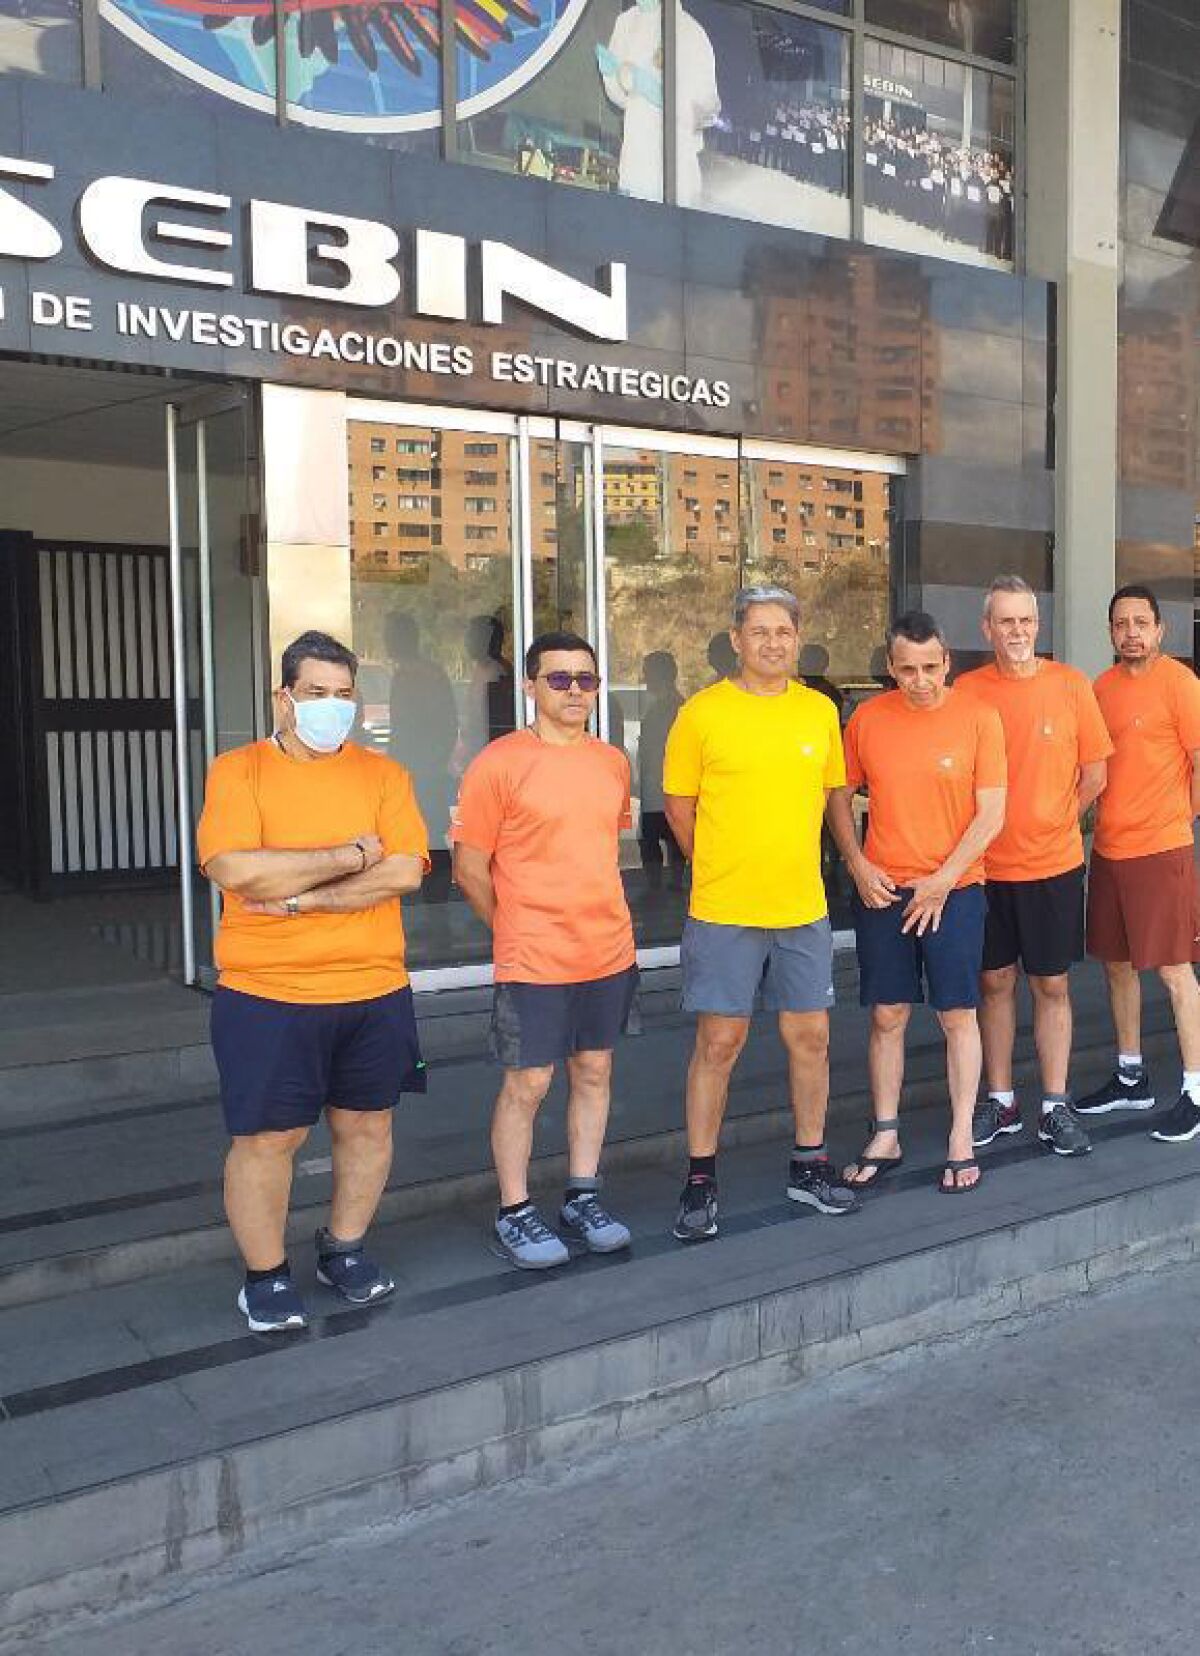 Six people in T-shirts and shorts stand outside a building.